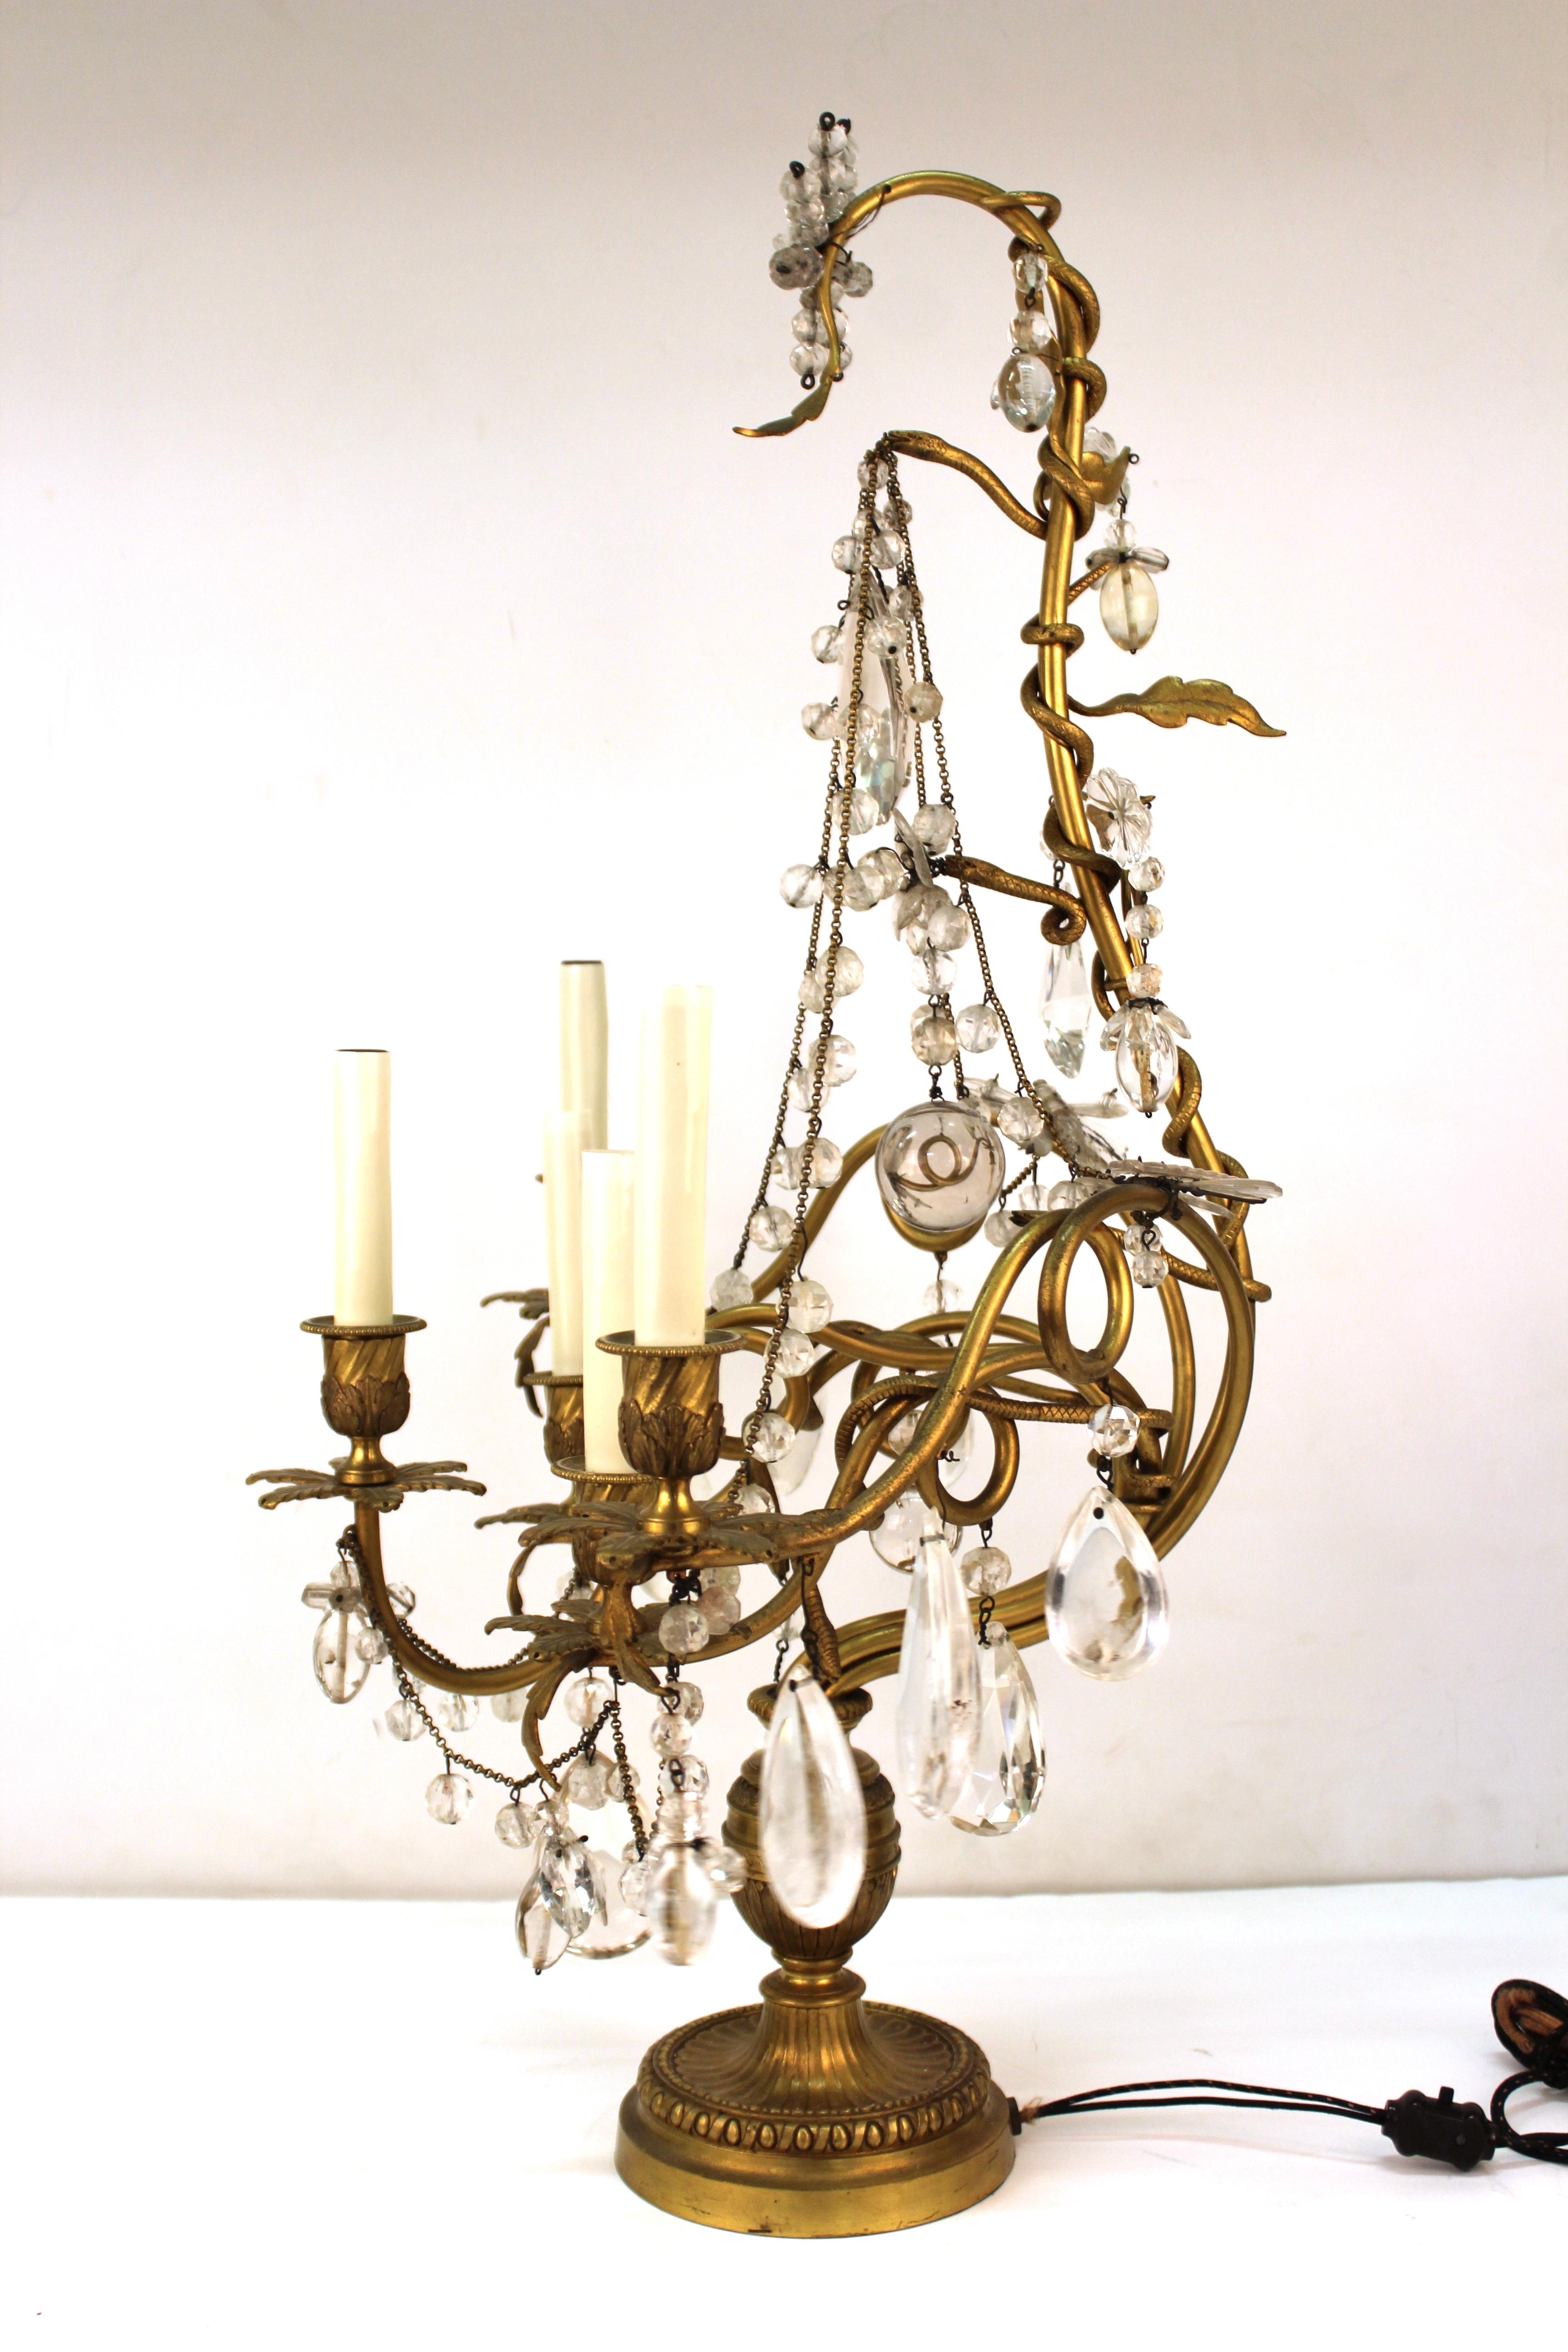 Late 19th Century Rococo Style Bronze Girandole Table Lamps with Snakes and Crystals